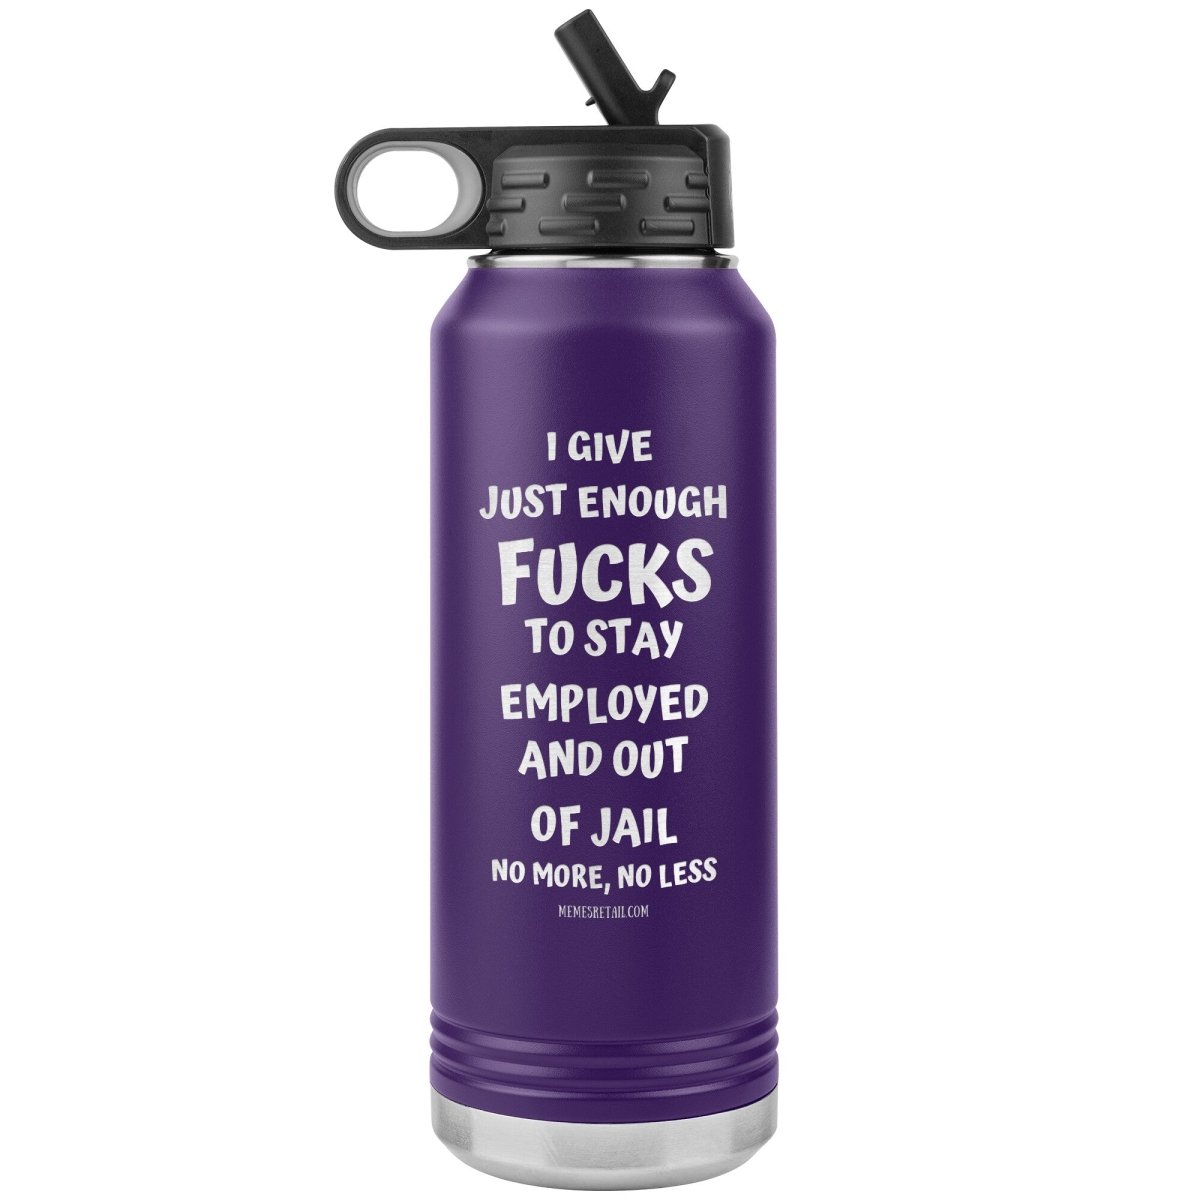 I Give Just Enough Fucks To Stay Employed And Out Of Jail, No More, No Less 32 Oz Water Bottle Tumbler, Purple - MemesRetail.com